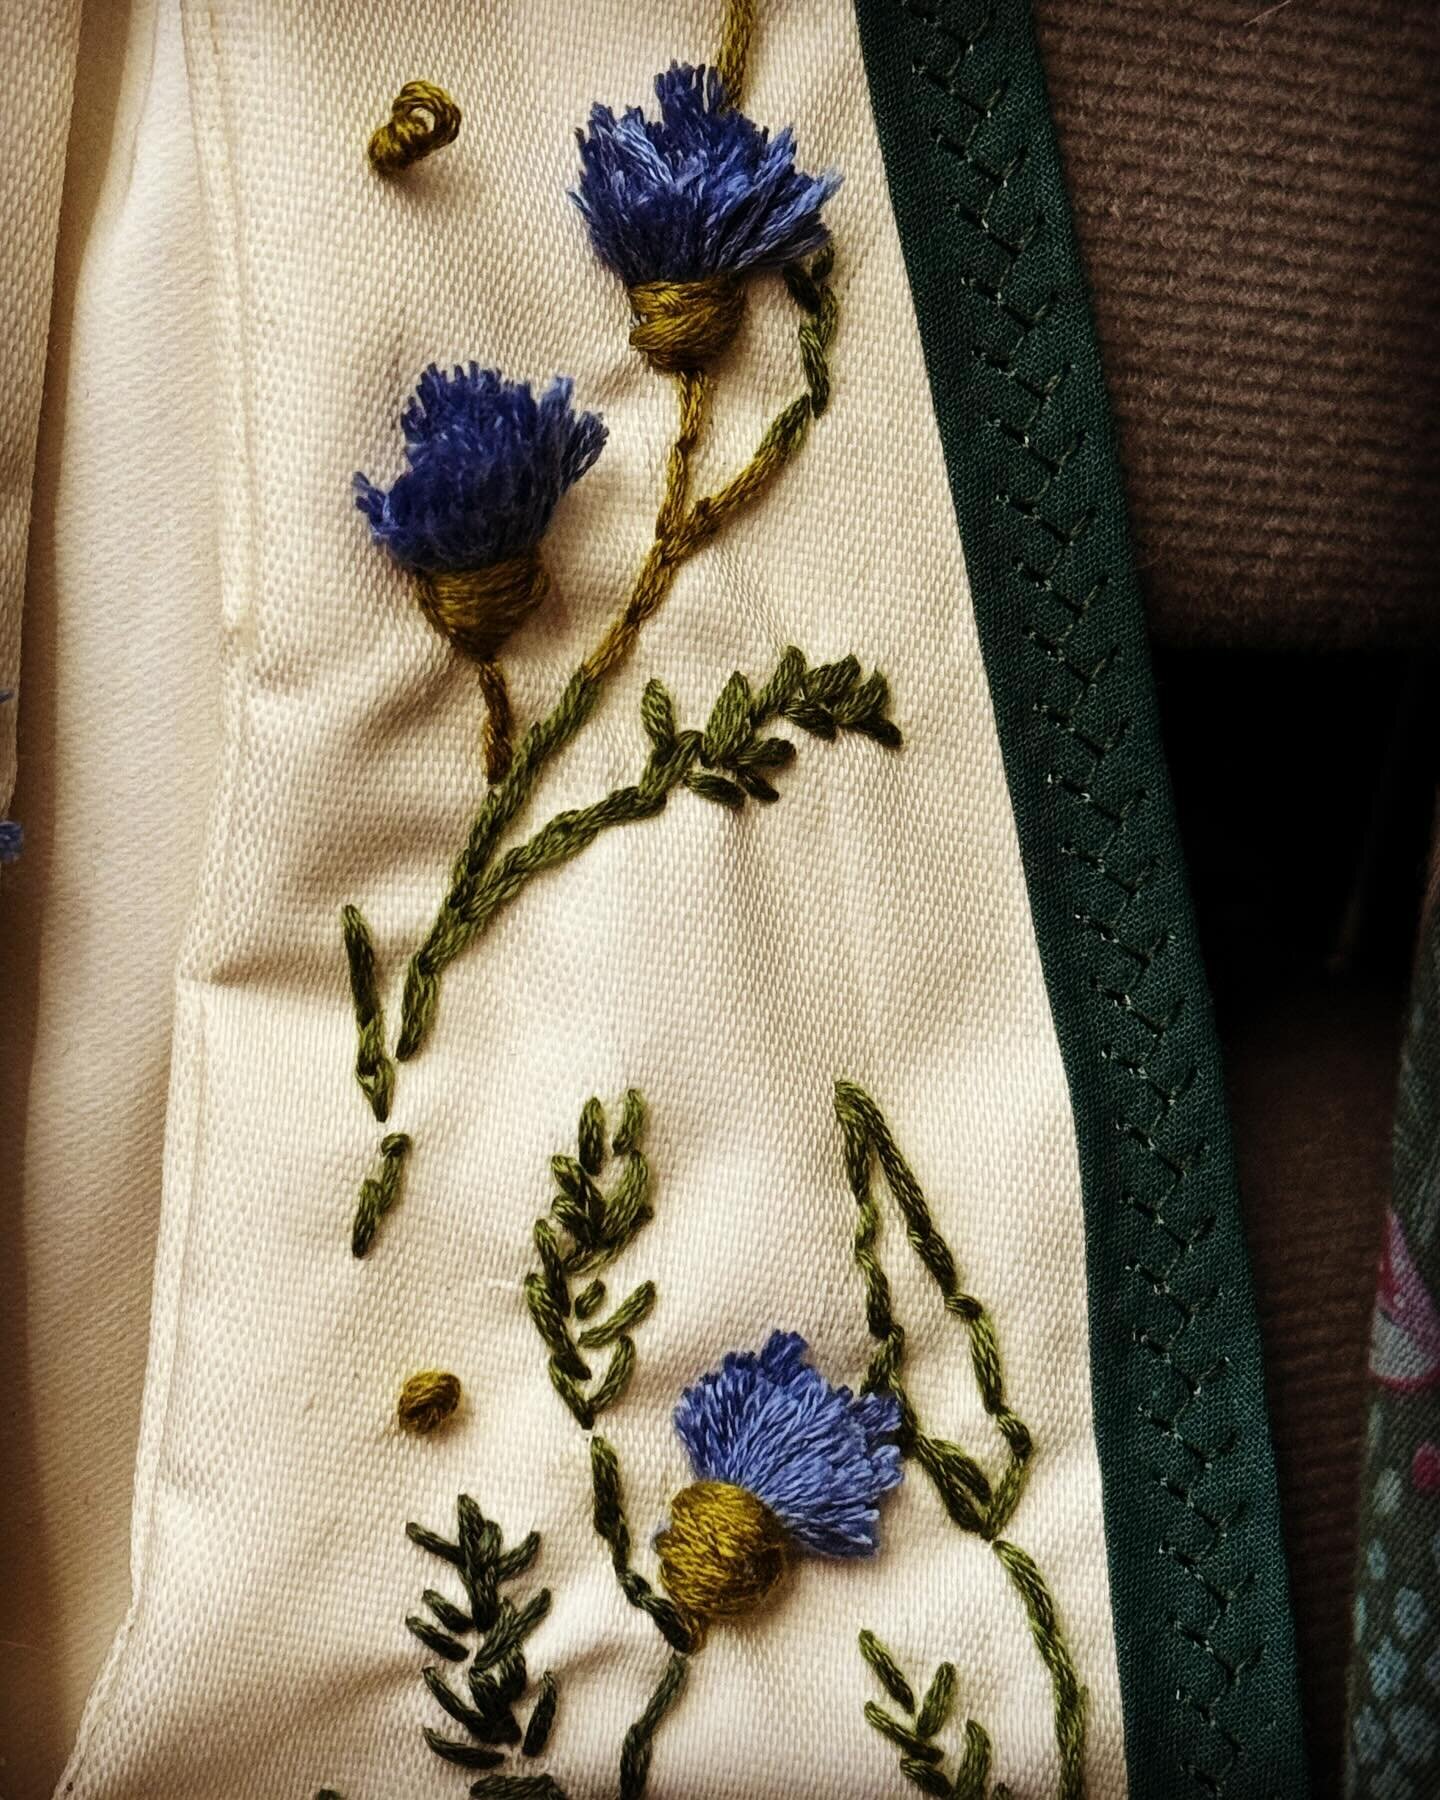 Started the New Year making this 18th century pocket with thistle embroidery, with a pattern from @thistlethistle. I absolutely loved this fun project! I took a few liberties with the sewing and embroidery, but this pattern they made was a wonderful 